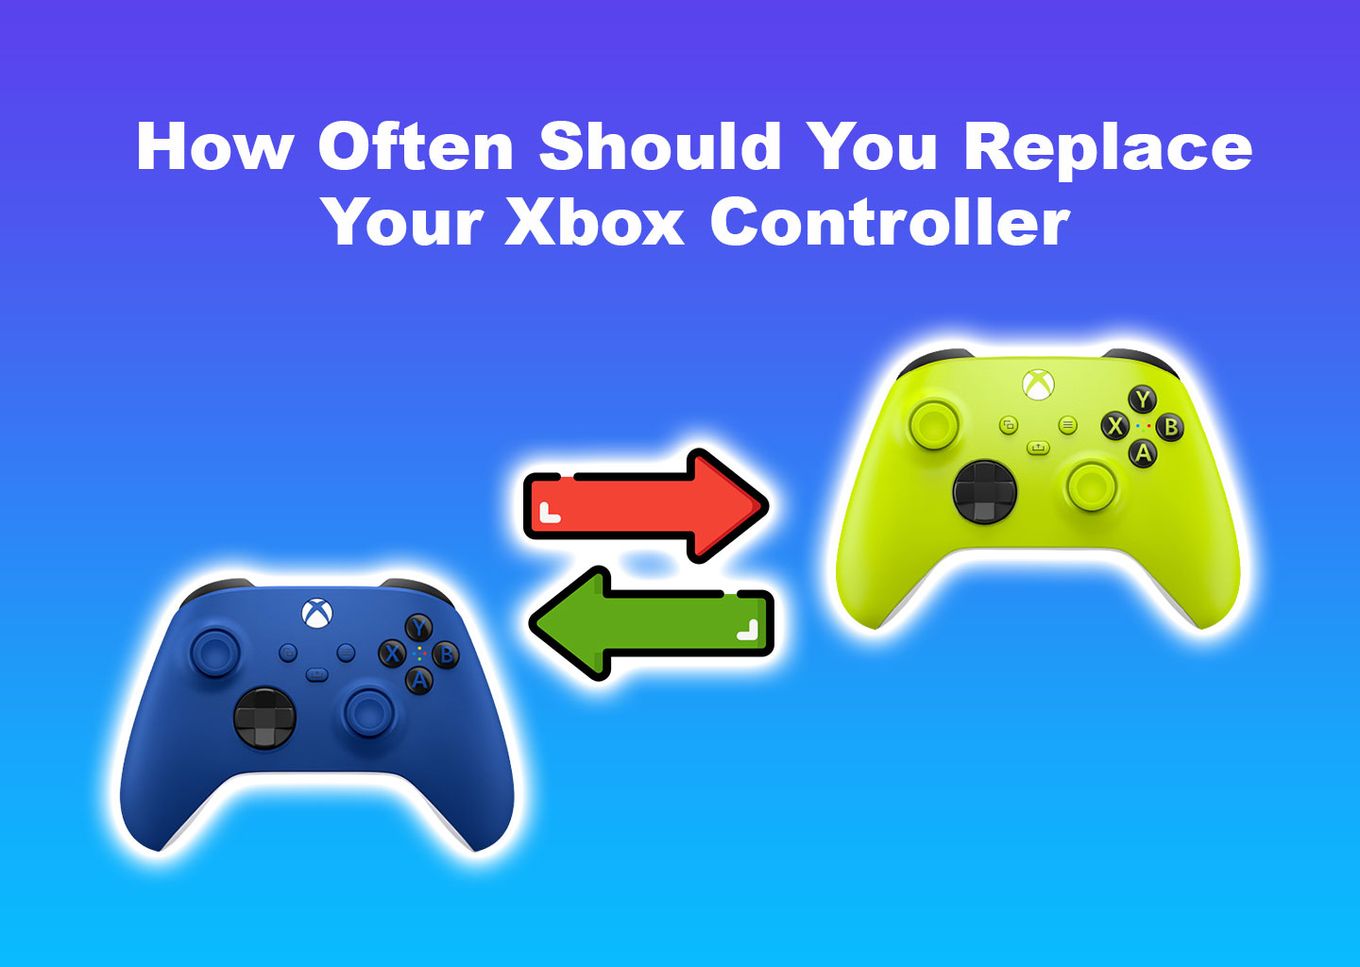 How Often Should You Replace Your Xbox Controller